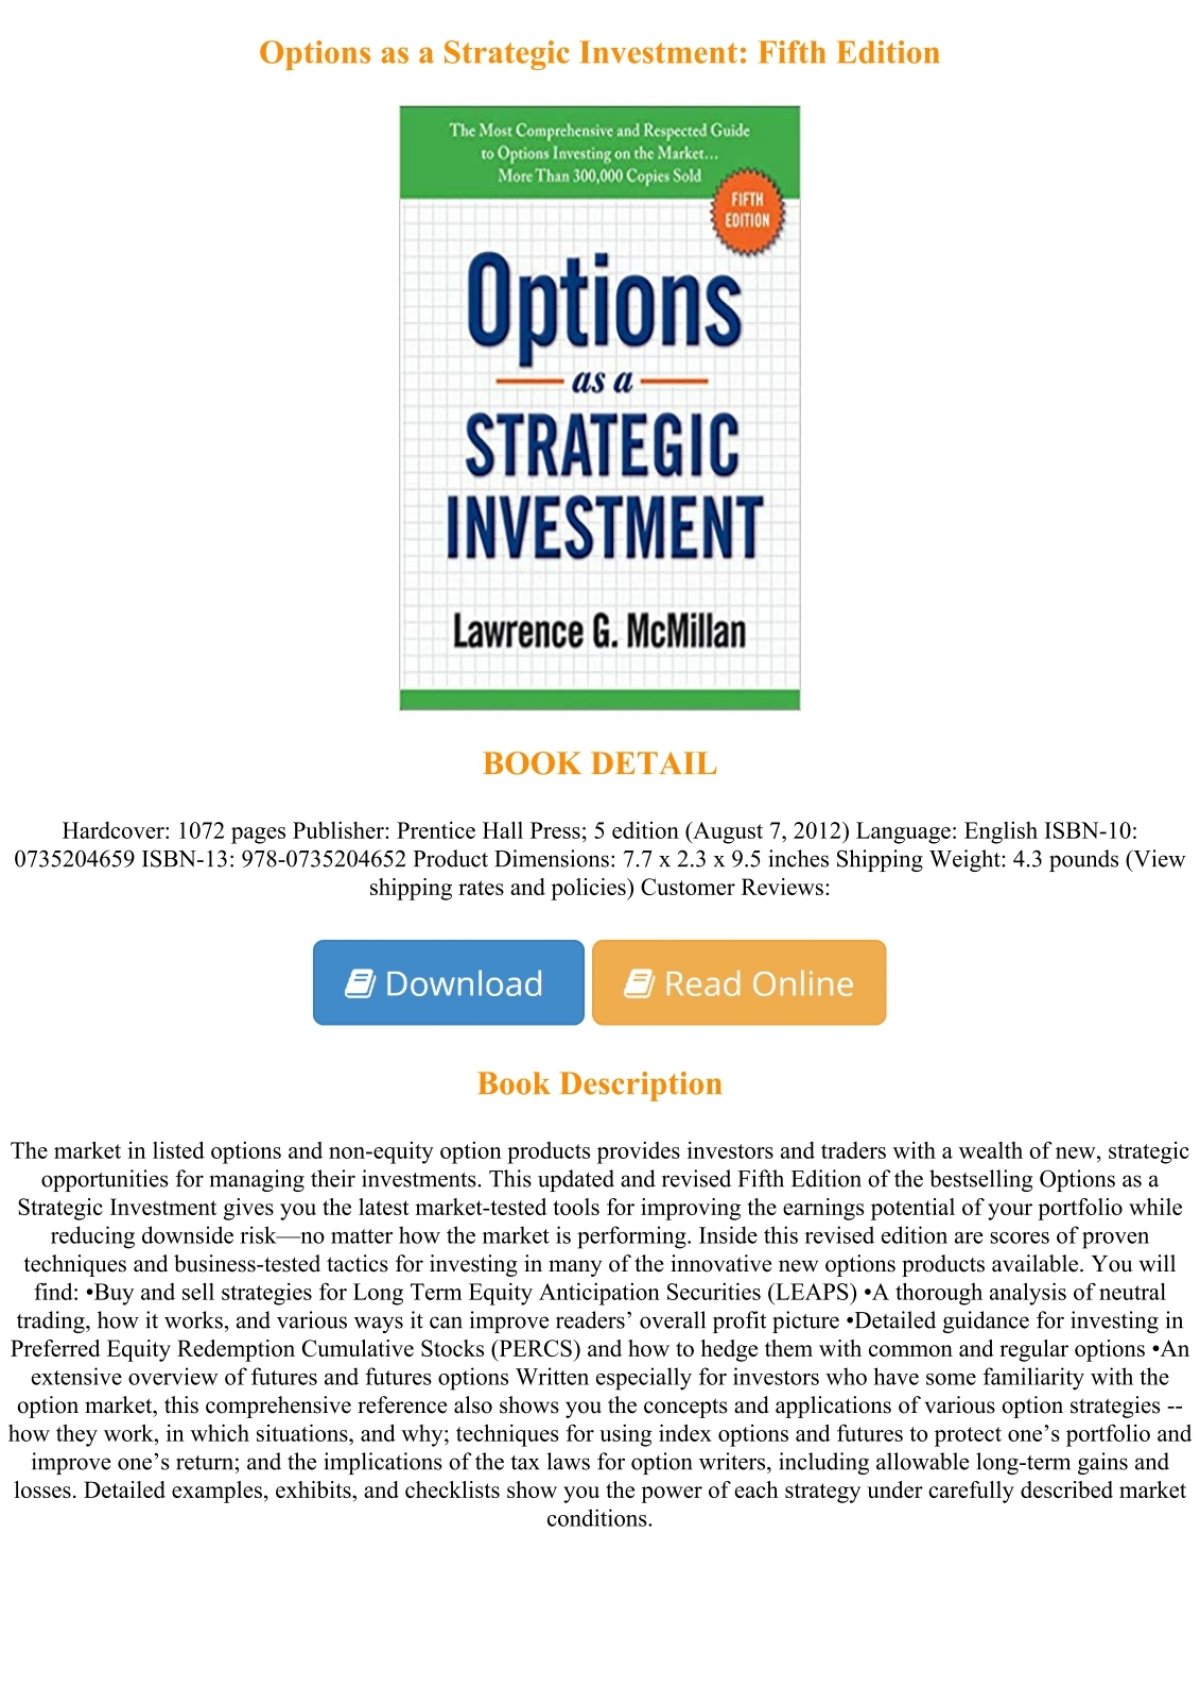 options as a strategic investment pdf free download